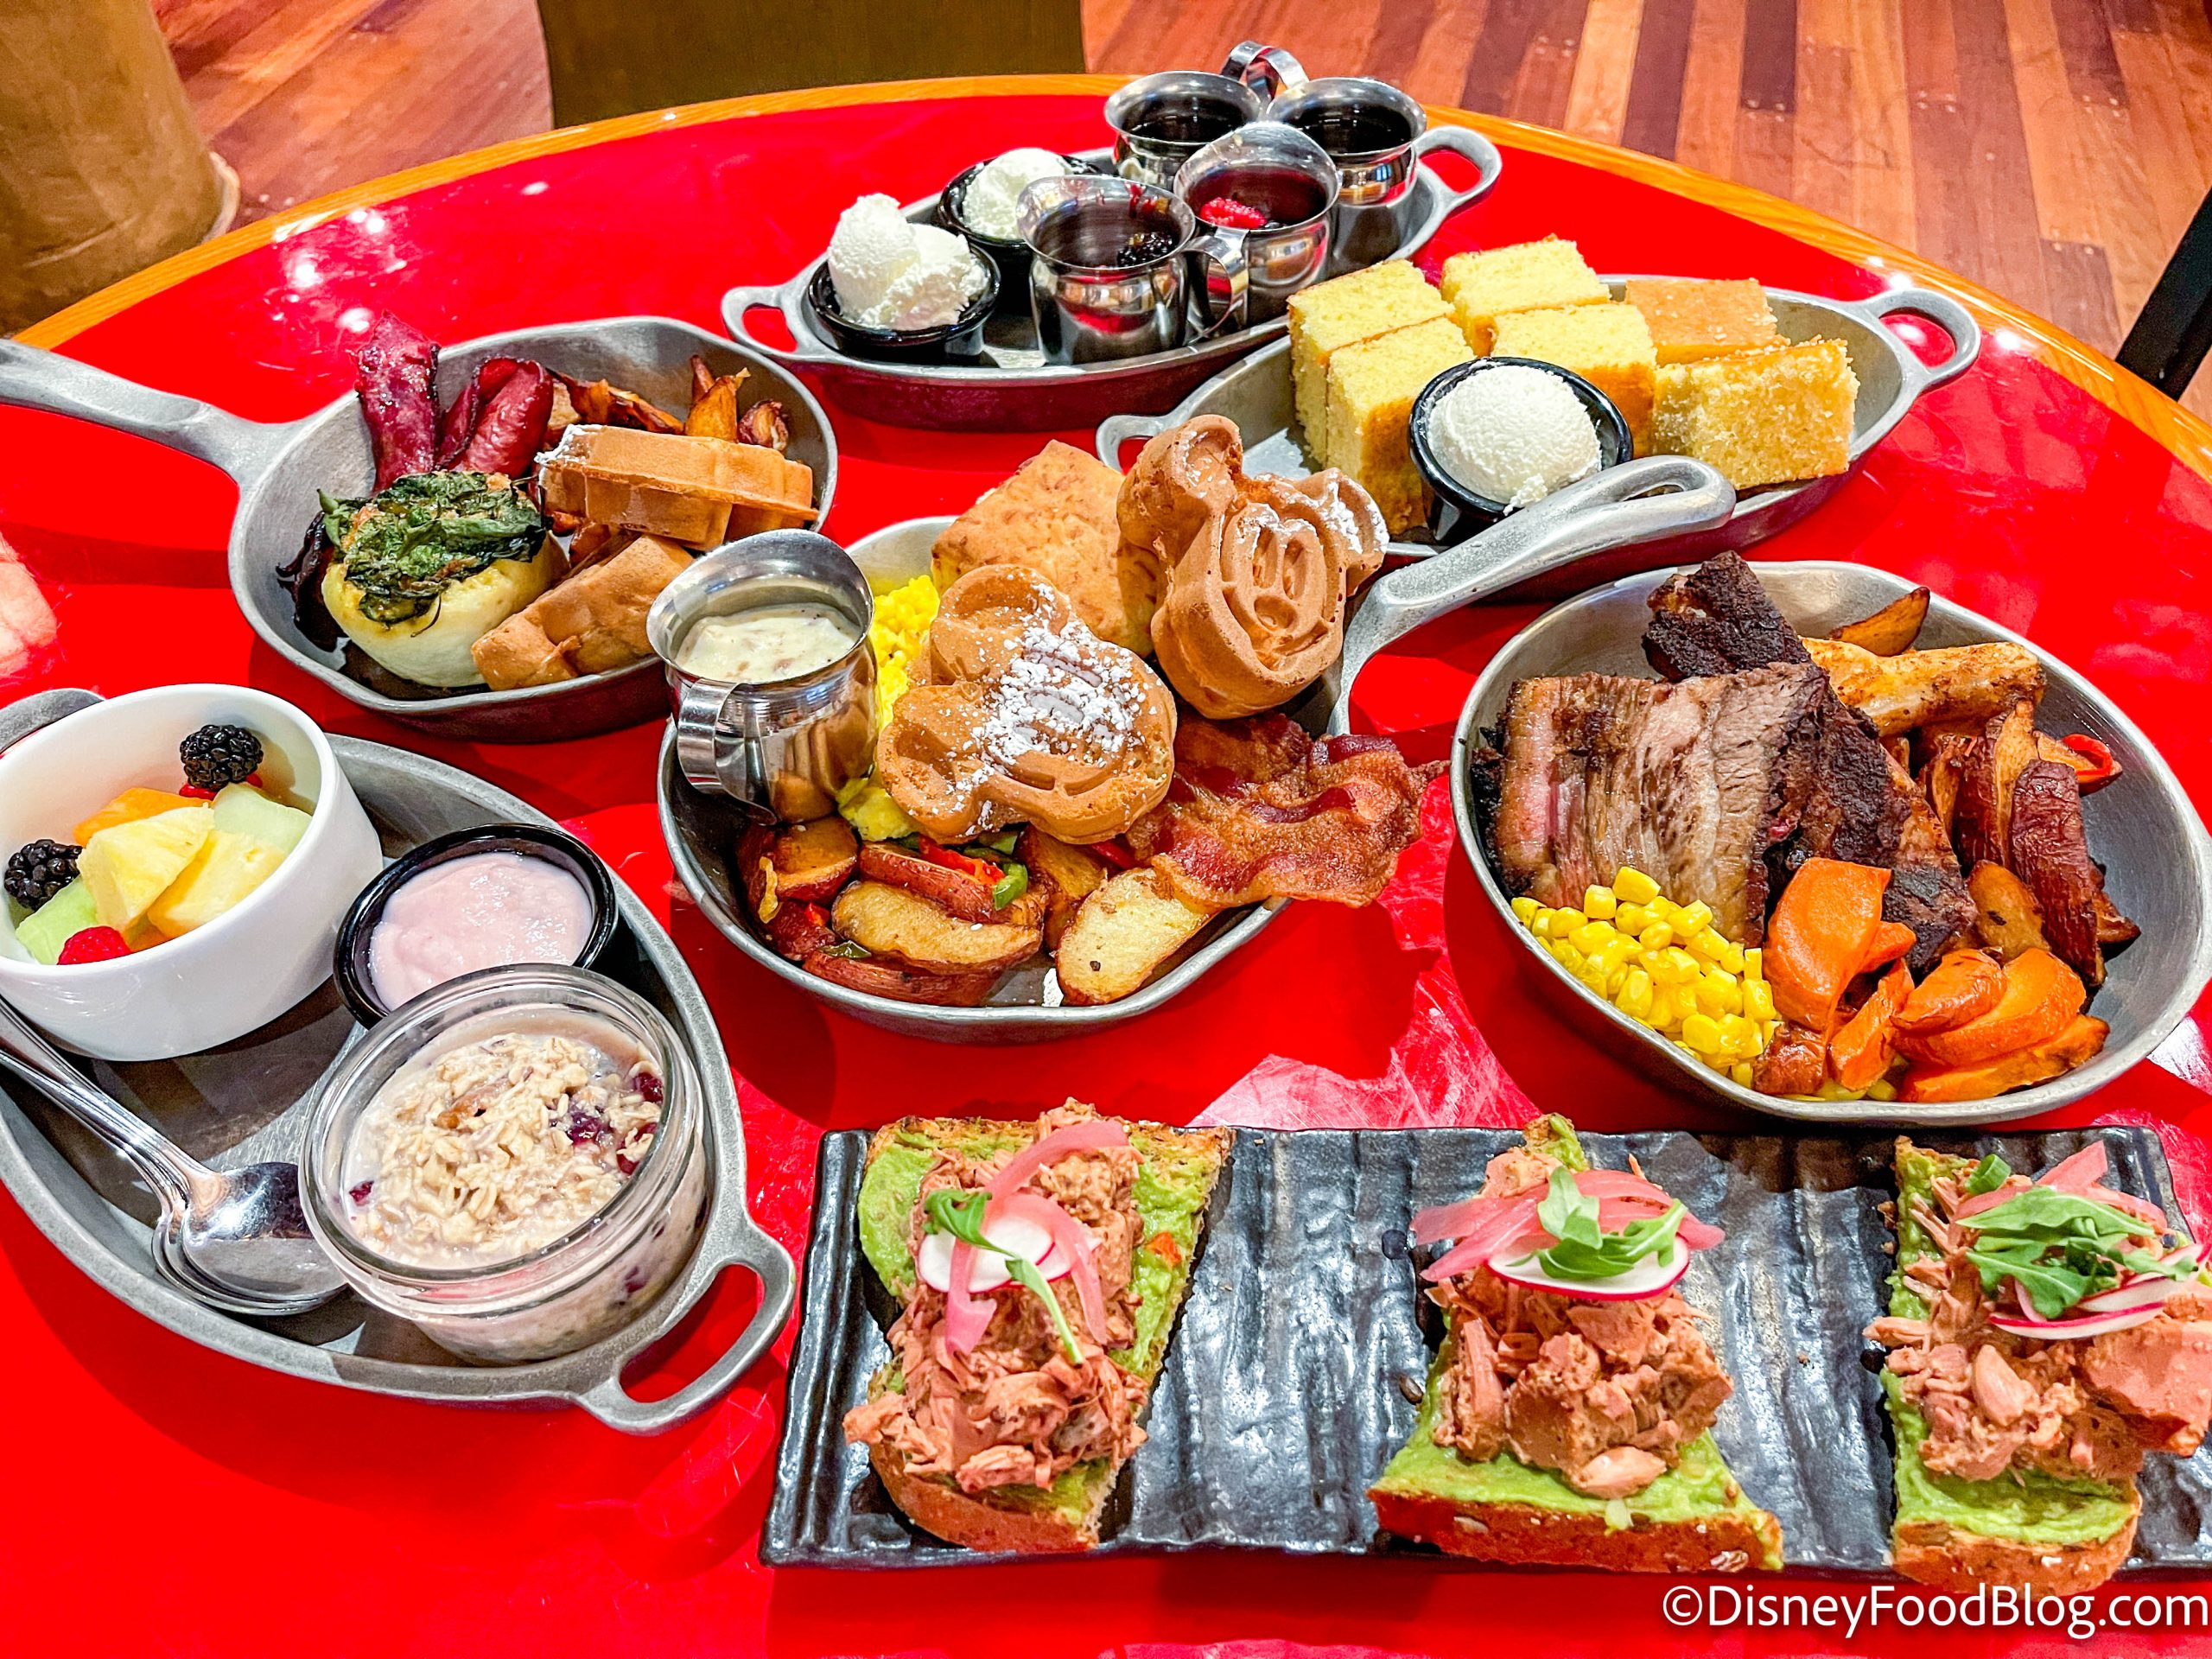 https://www.disneyfoodblog.com/wp-content/uploads/2023/02/2023-wdw-disneys-wilderness-lodge-whispering-canyon-cafe-review-brunch-breakfast-FULL-SPREAD-76-scaled.jpg